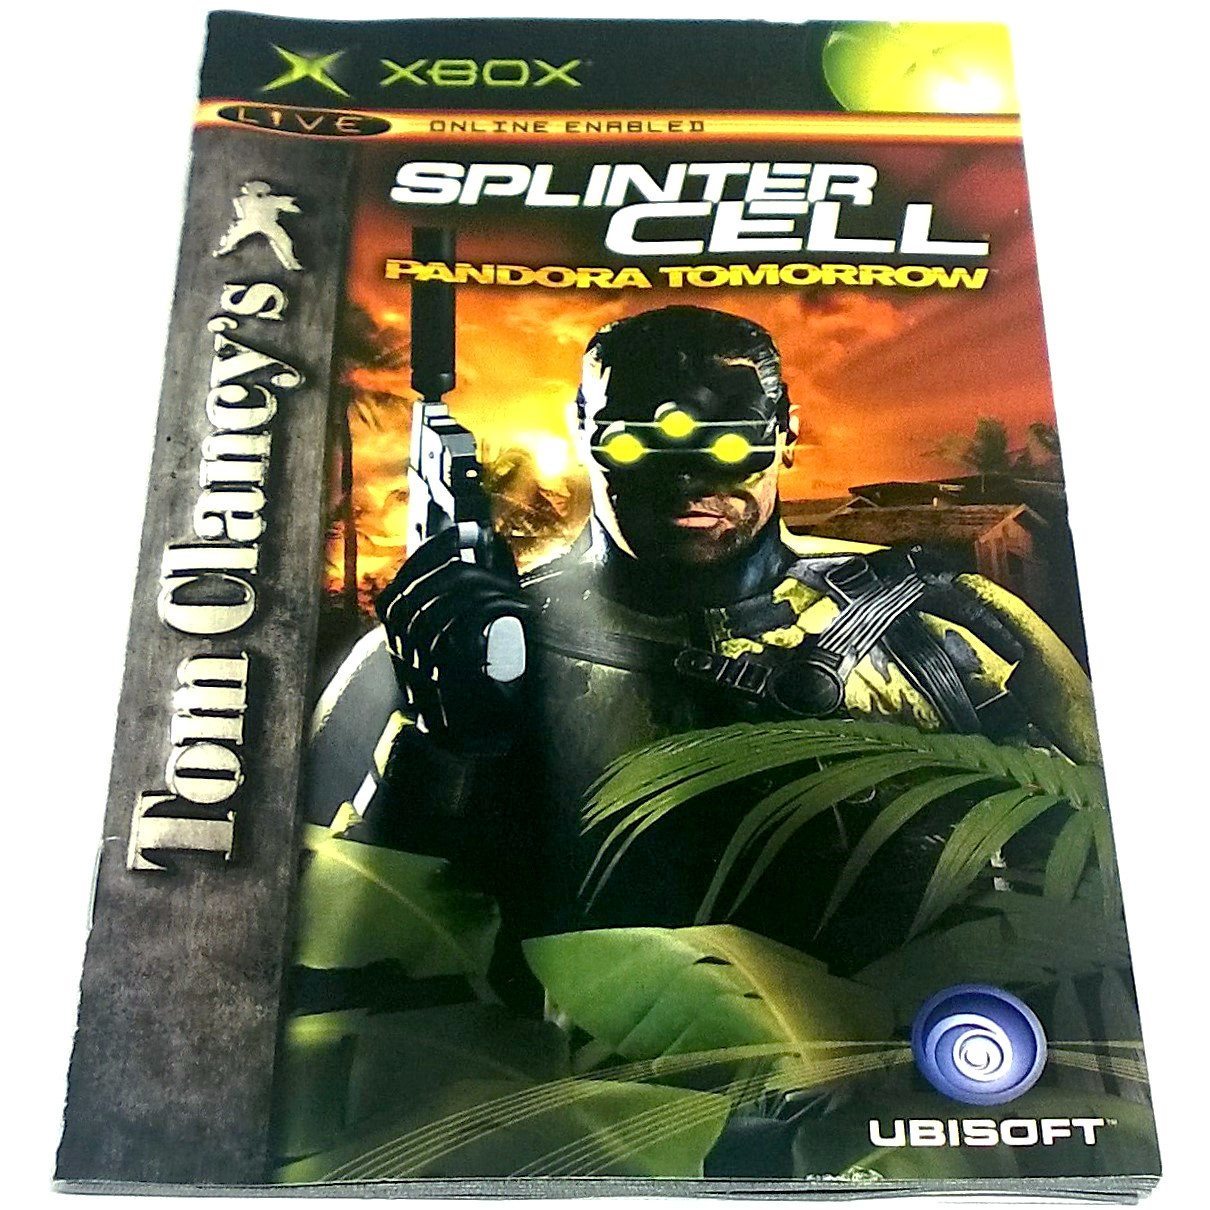 Tom Clancy's Splinter Cell: Pandora Tomorrow for Xbox - Front of manual